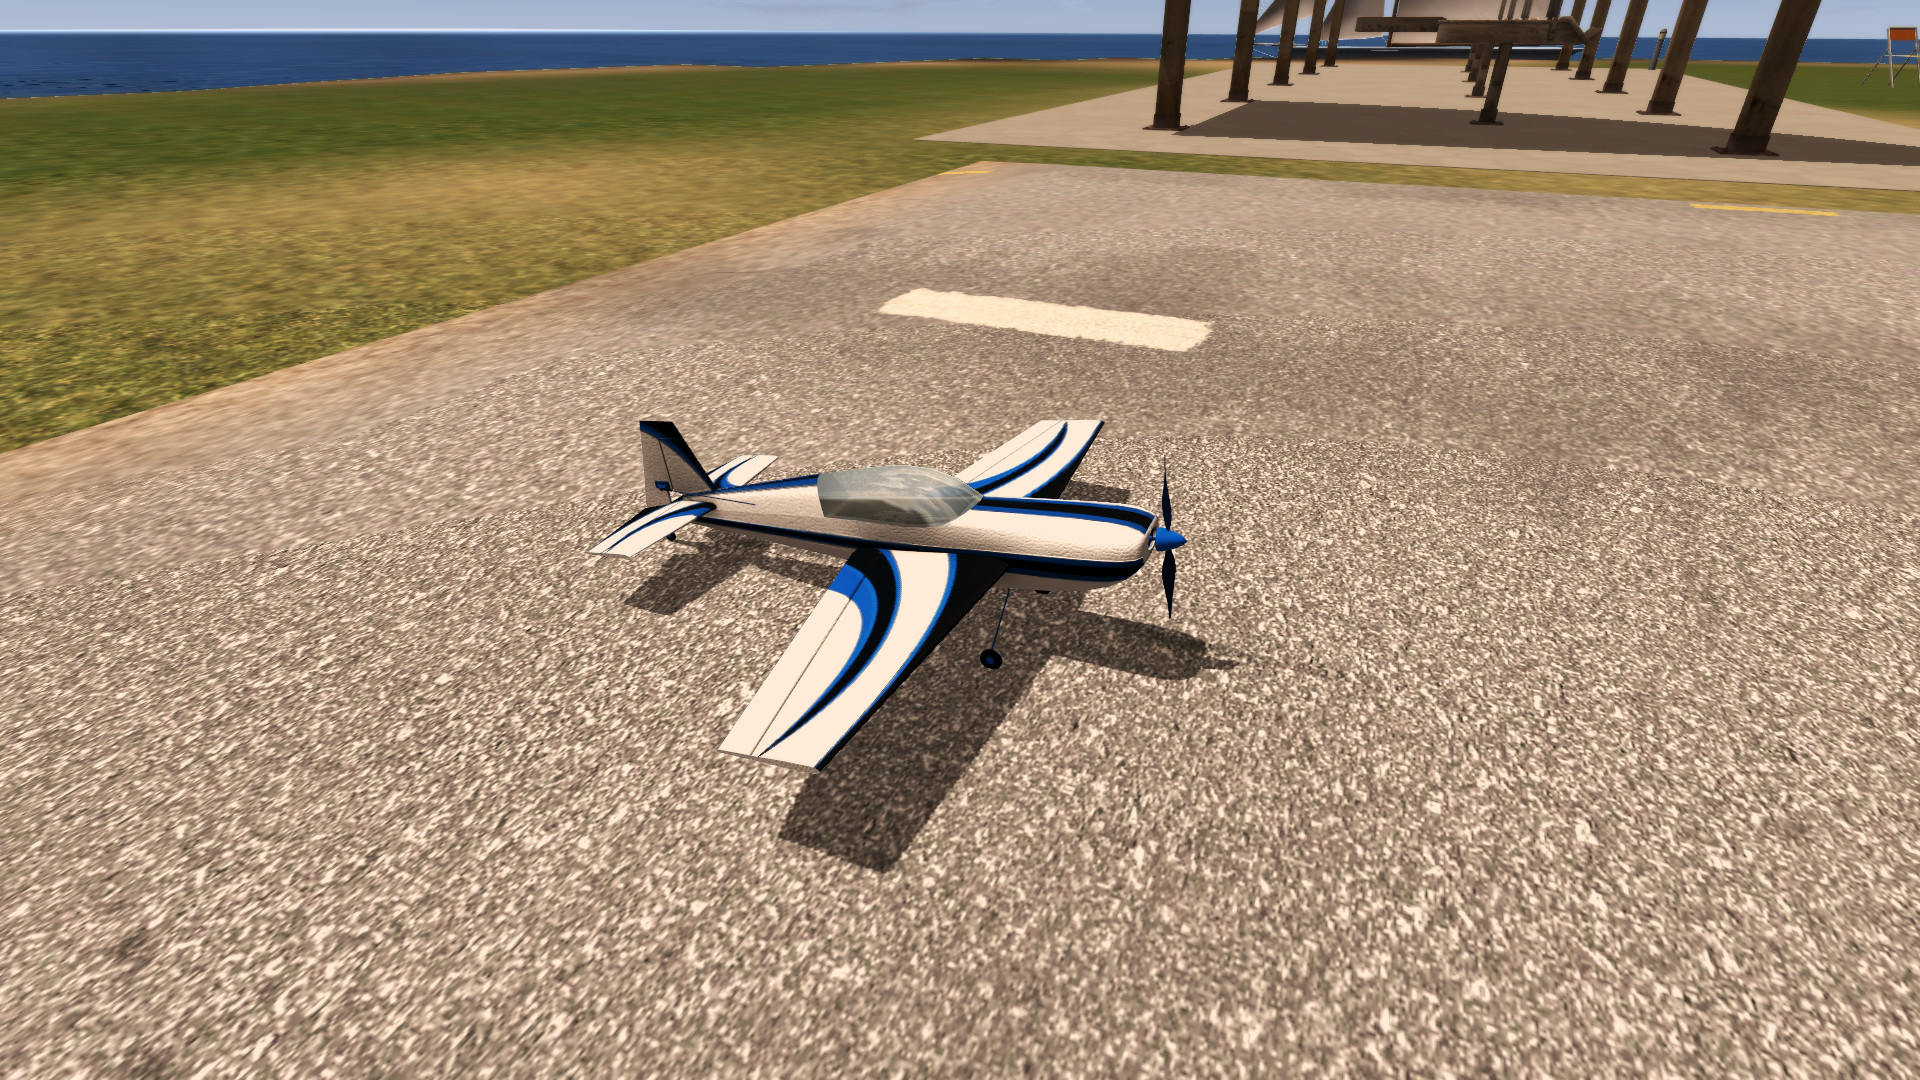 Extreme Plane Stunts Simulator instal the new version for ios